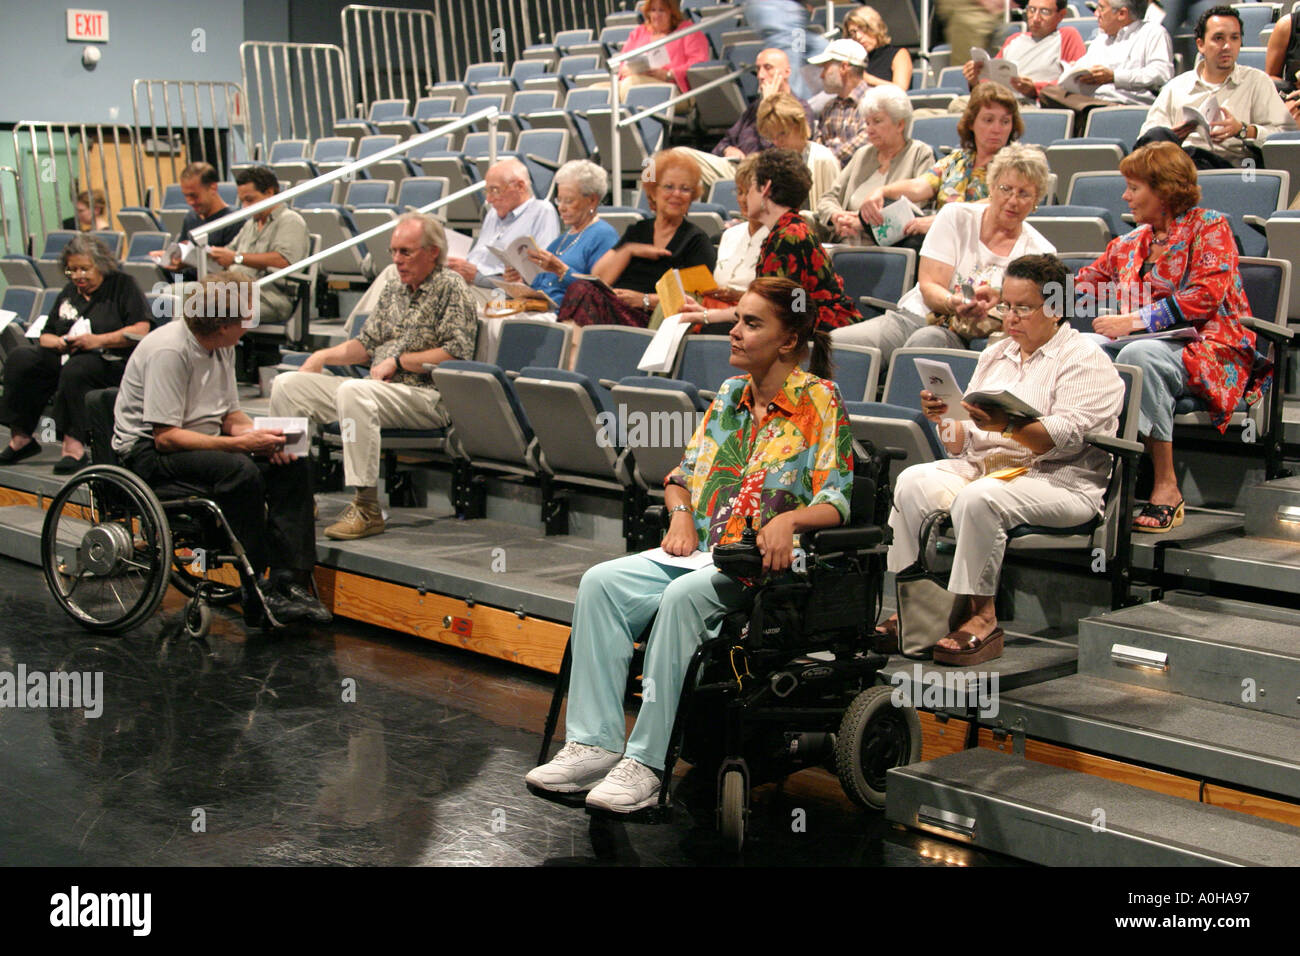 Miami Florida,New World School of the Arts Dance Theatre,theater,AXIS Dance Company,includes disabled dancer,dancing,entertainment,audience,crowd,U.S. Stock Photo